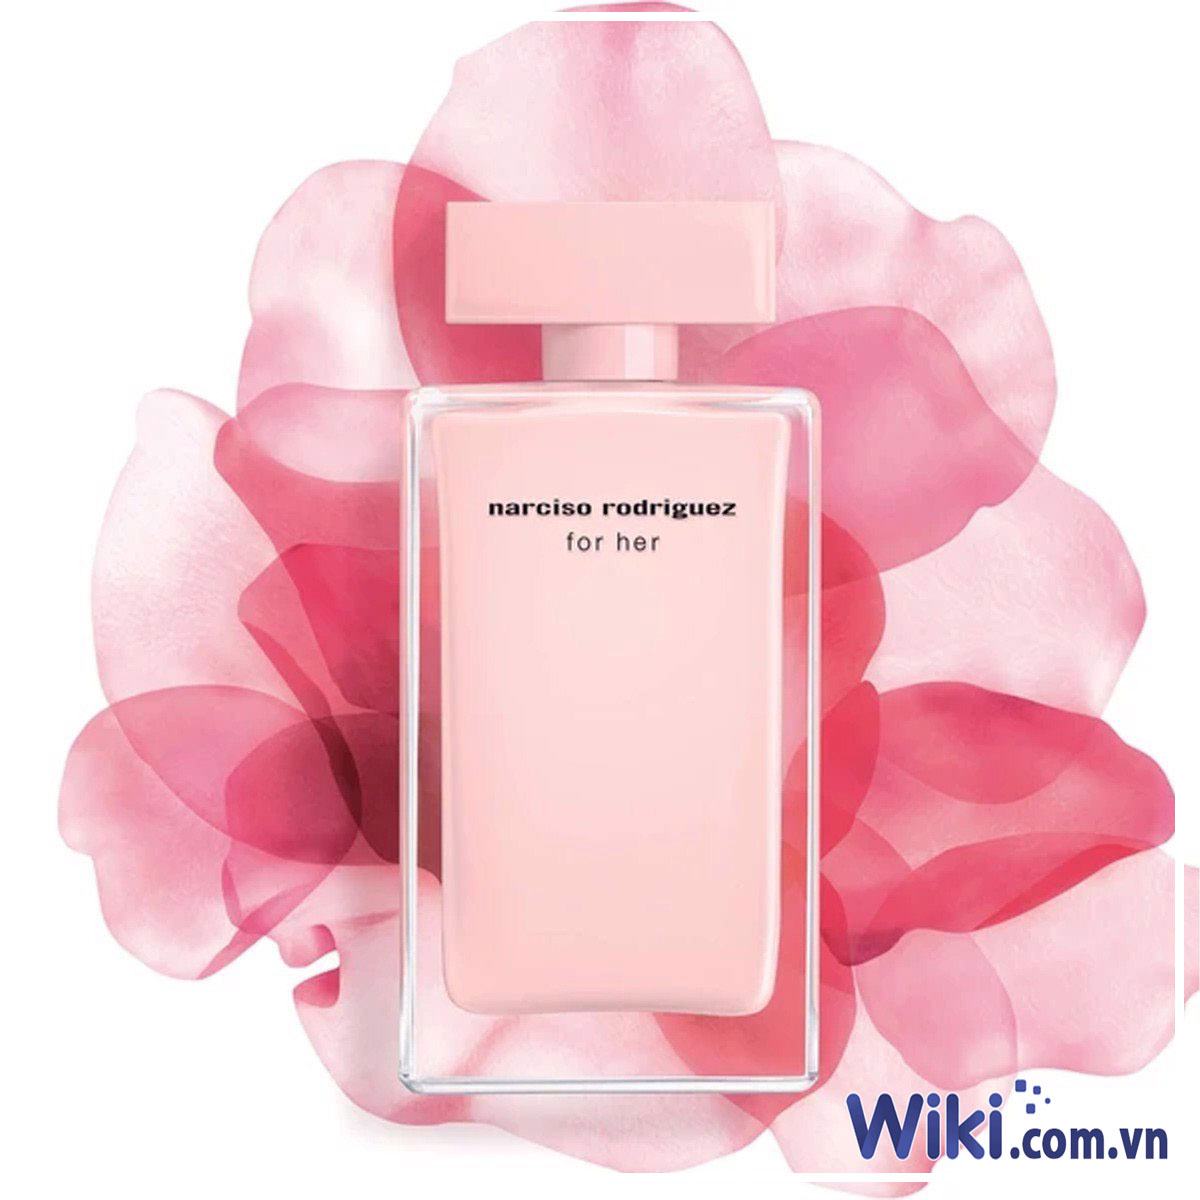 nuoc-hoa-nu-narciso-rodriguez-for-her-edp